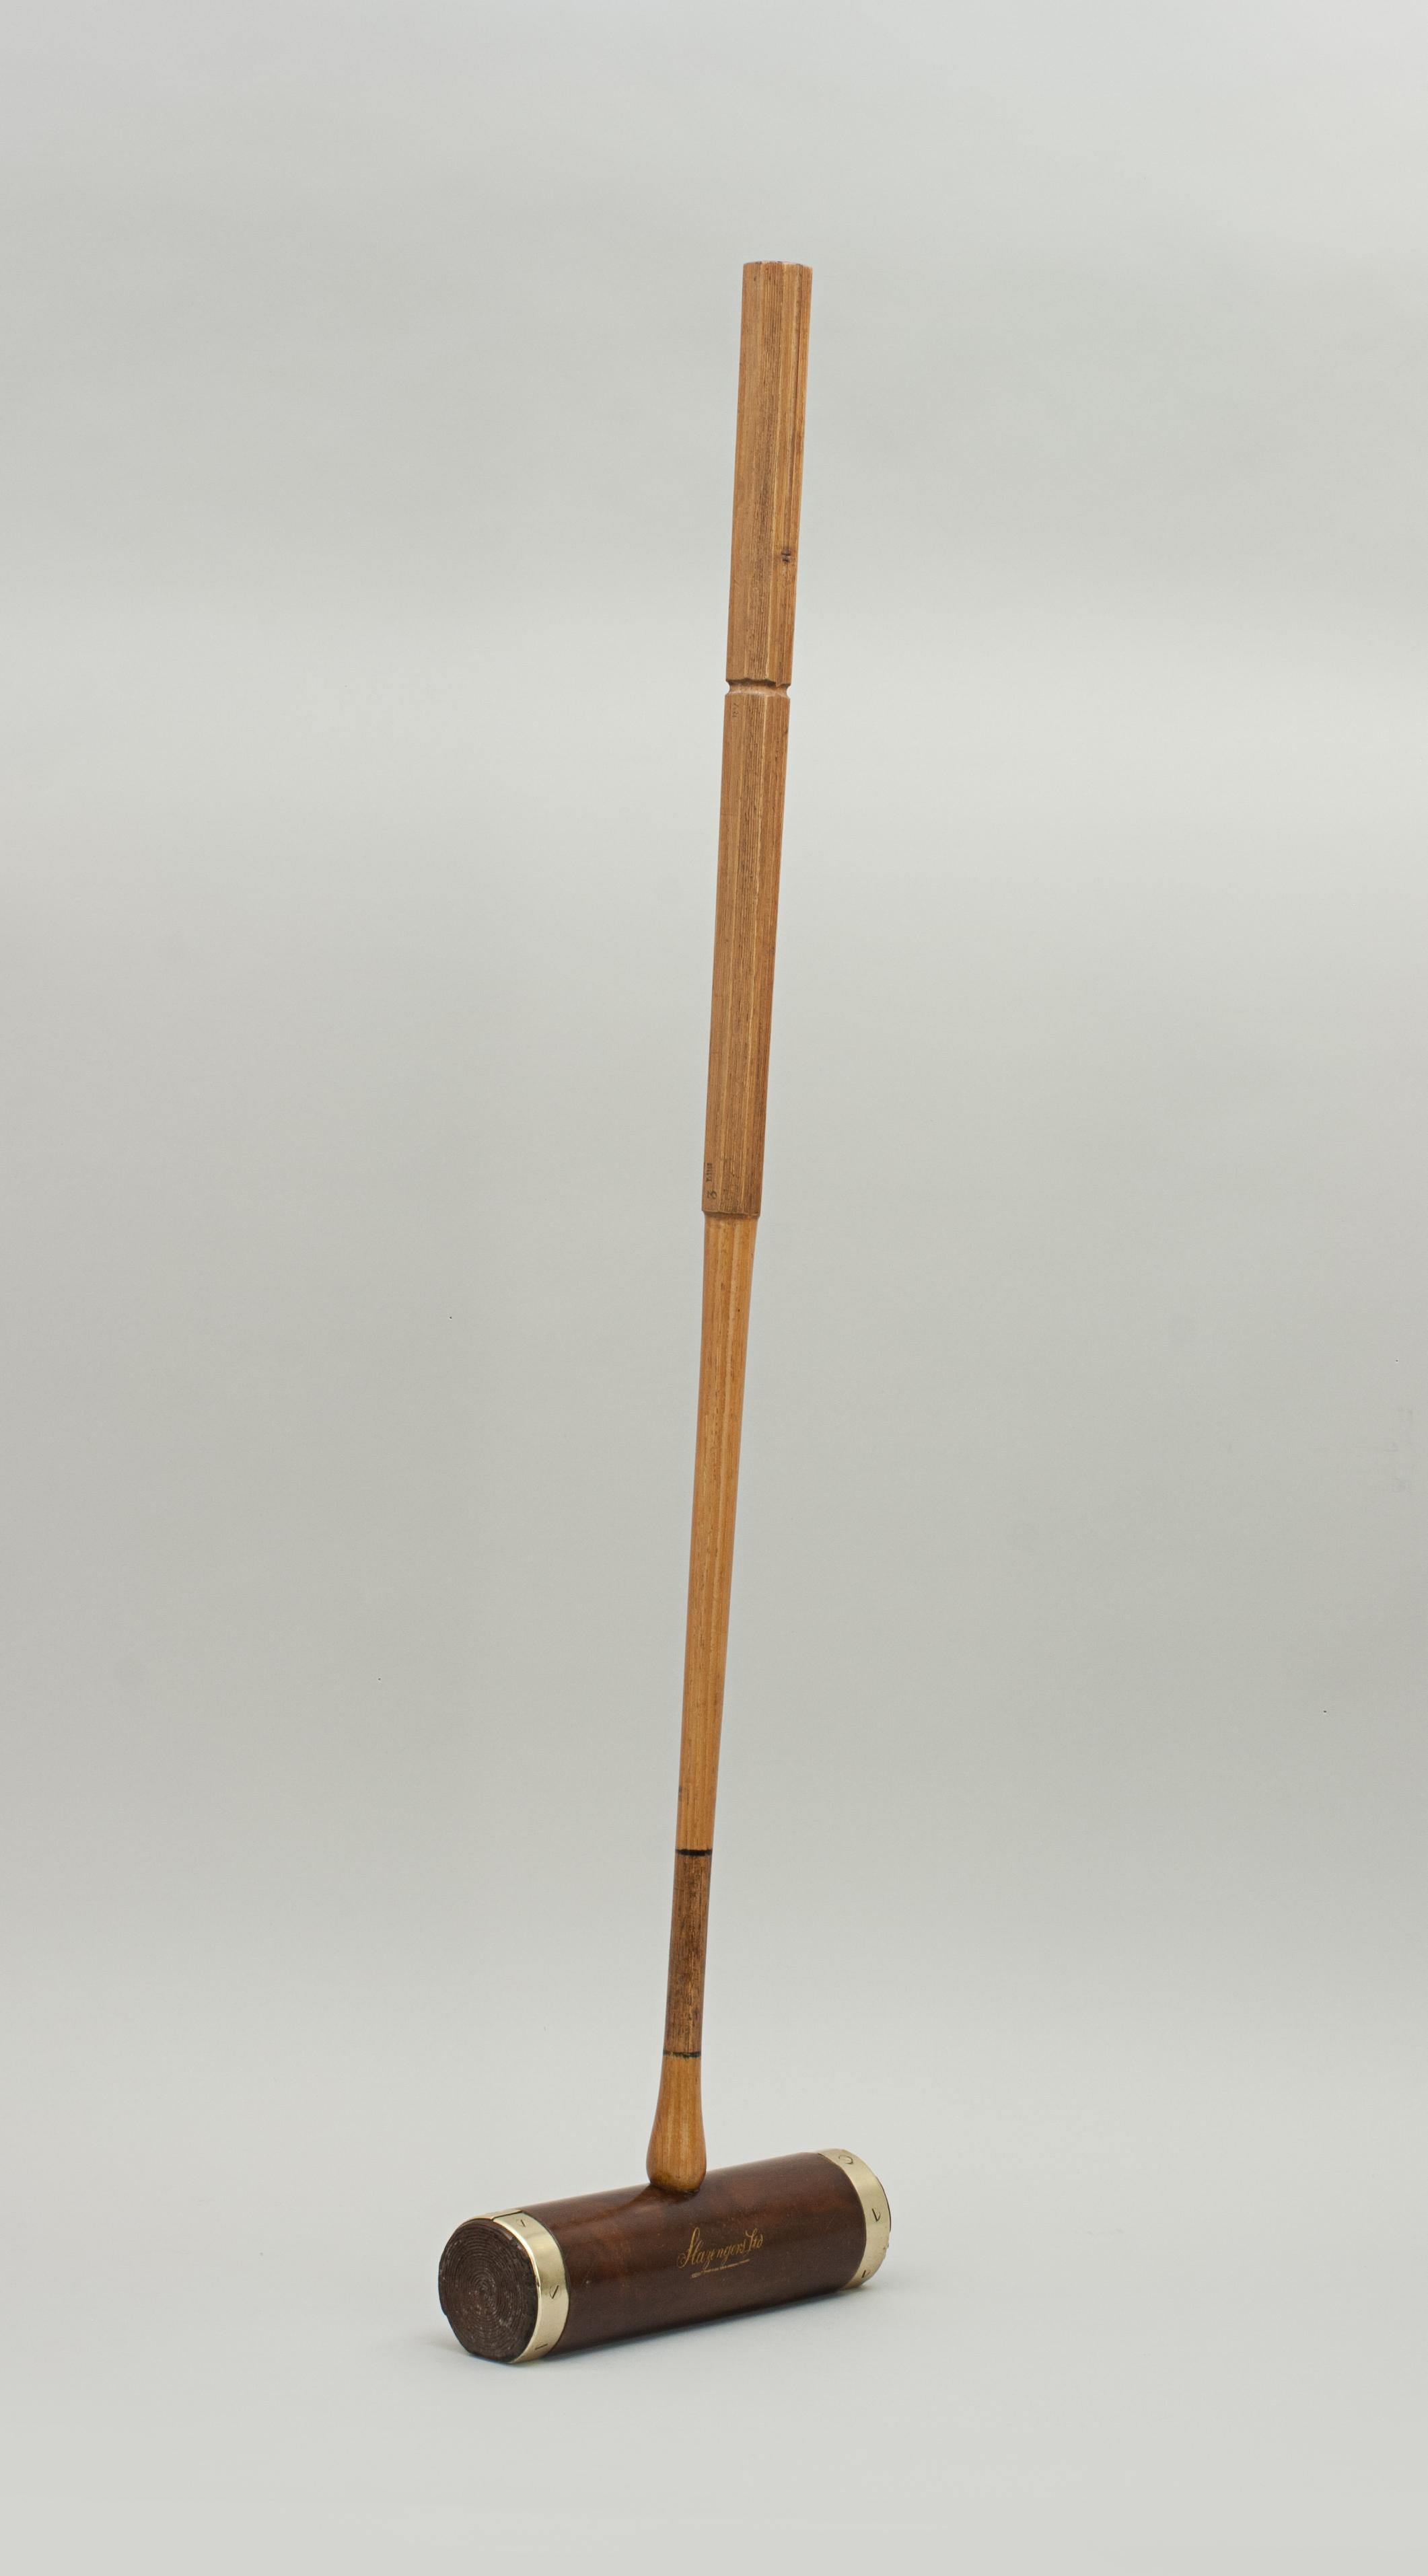 Antique Slazenger 'Corbally' Croquet mallet.
A brass bound flat bottom croquet mallet by Slazenger with a Lignum Vitae head. The mallet head has 'Slazengers Ltd' and 'The Corbally' written in gold on the side and it is fitted with an octagonal